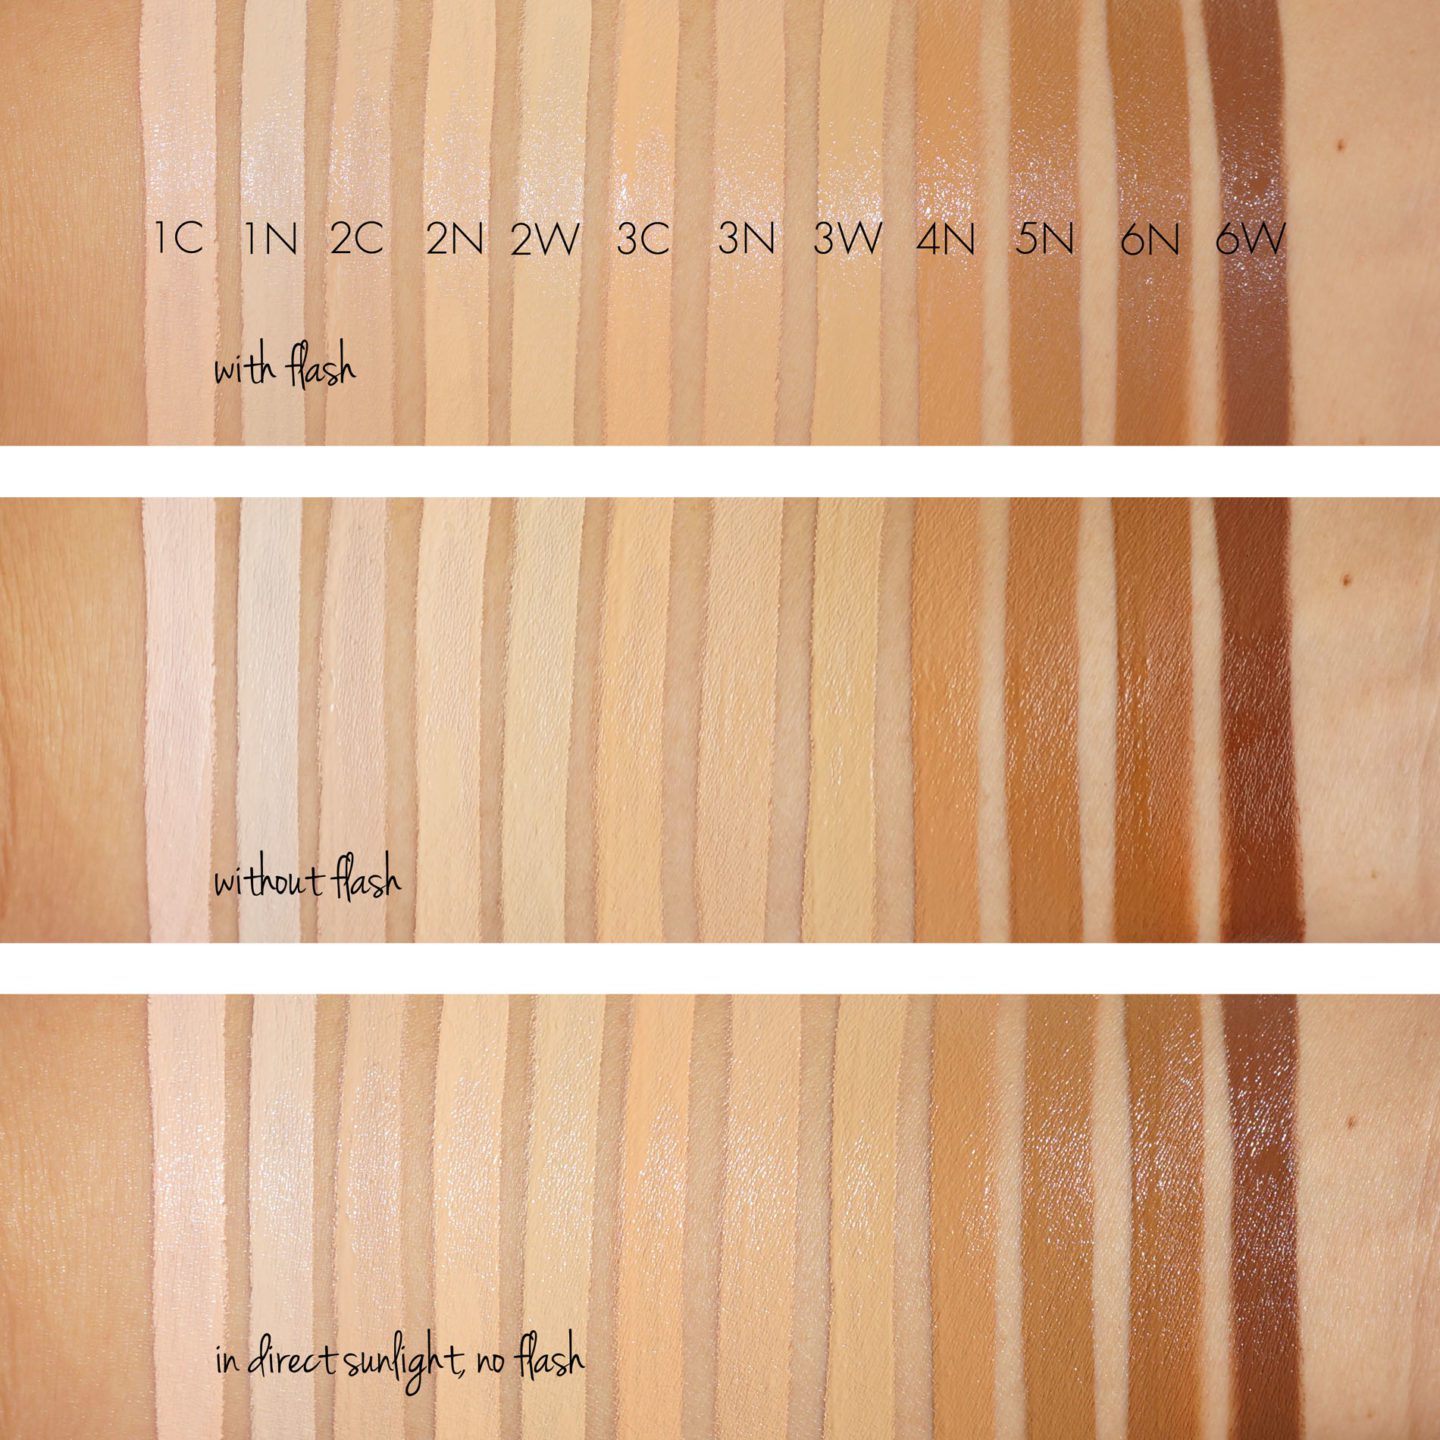 Laura Mercier Flawless Fusion Concealer Swatches and Review | The Beauty Look Book